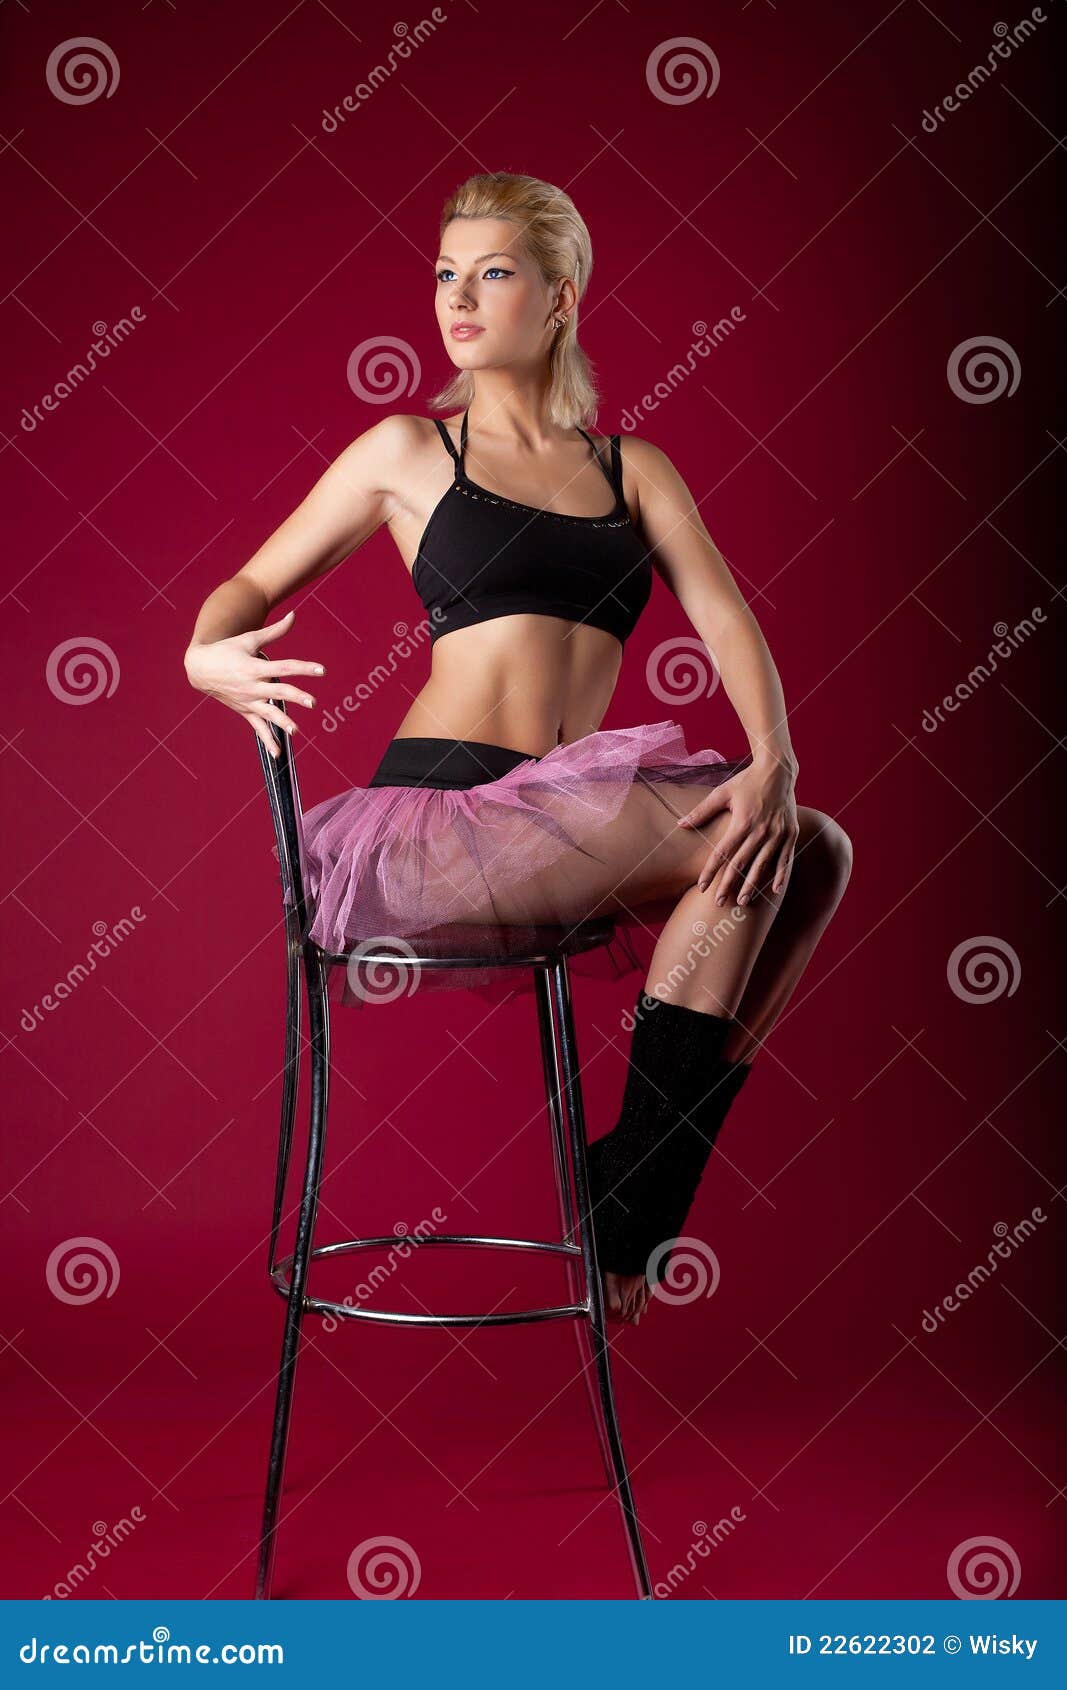 Young Woman Posing In Dance Sport Costume On Chair Stock Photo